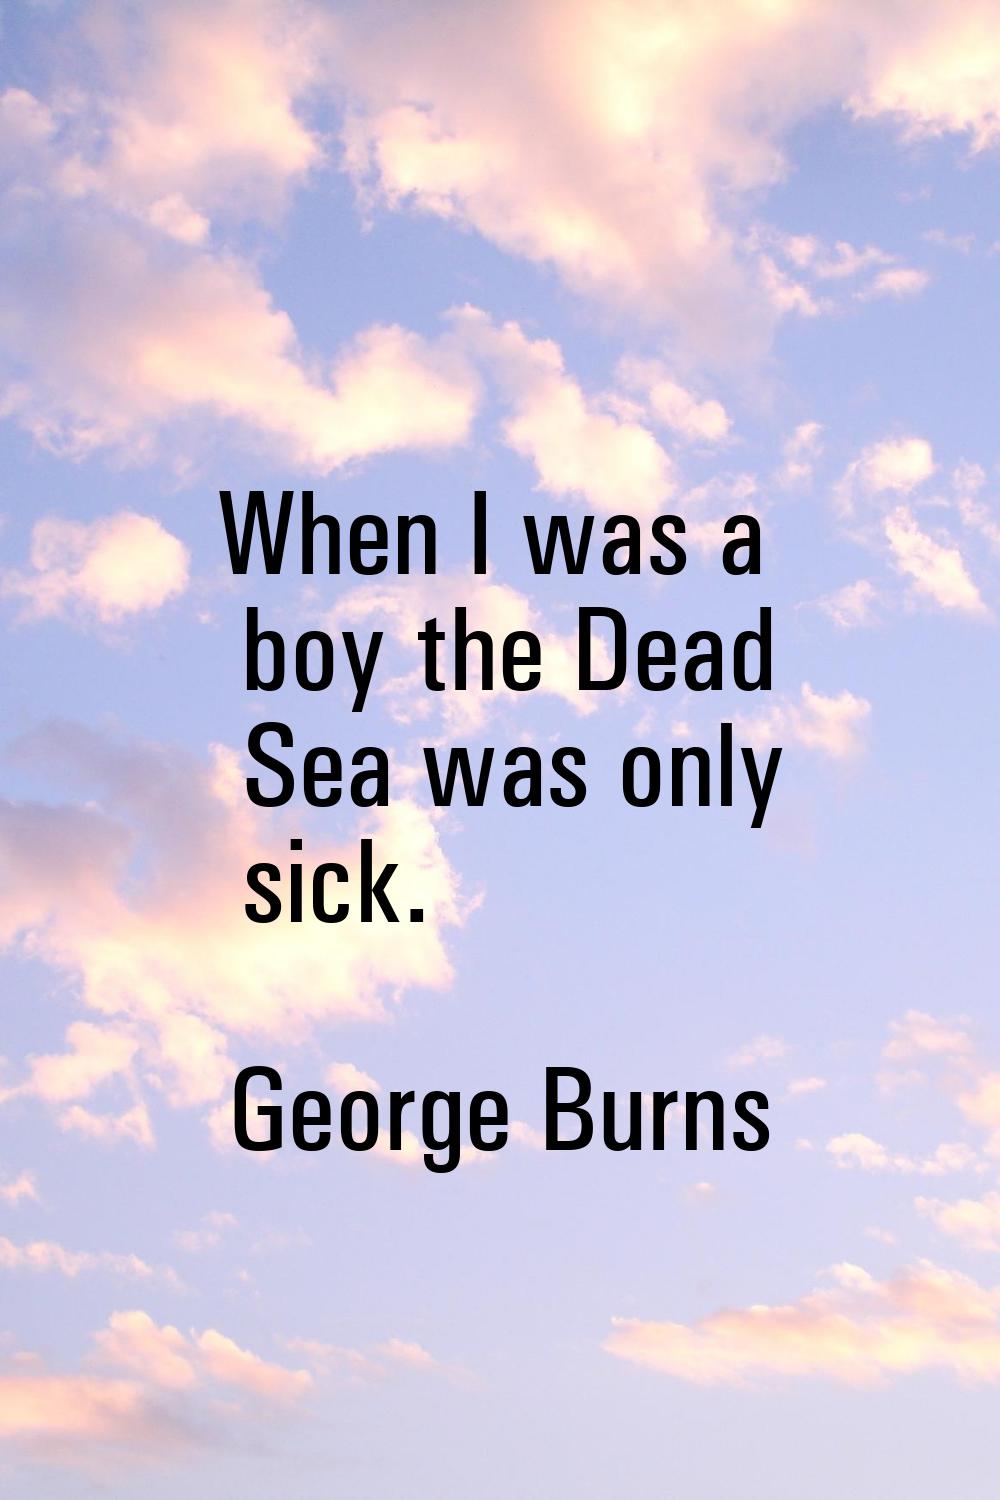 When I was a boy the Dead Sea was only sick.